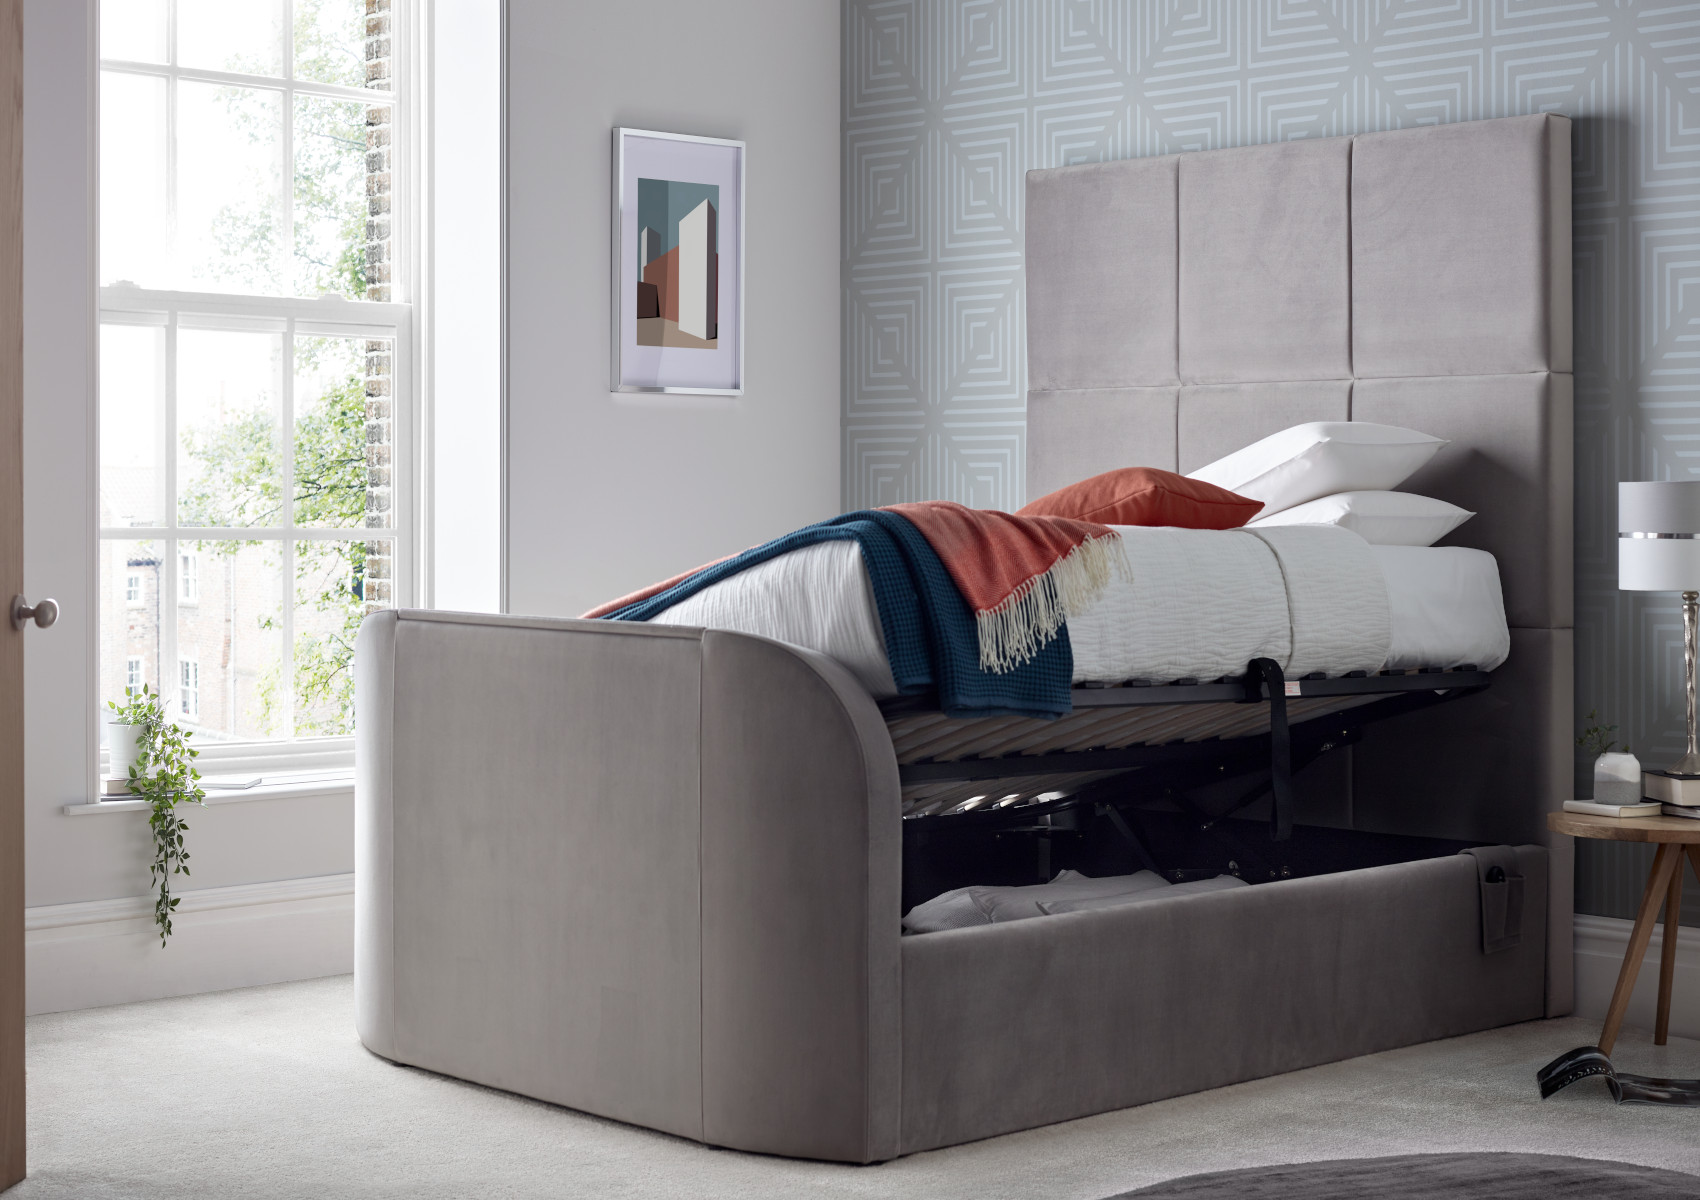 View Somerton Grey Upholstered TV King Size Bed Frame Only Time4Sleep information